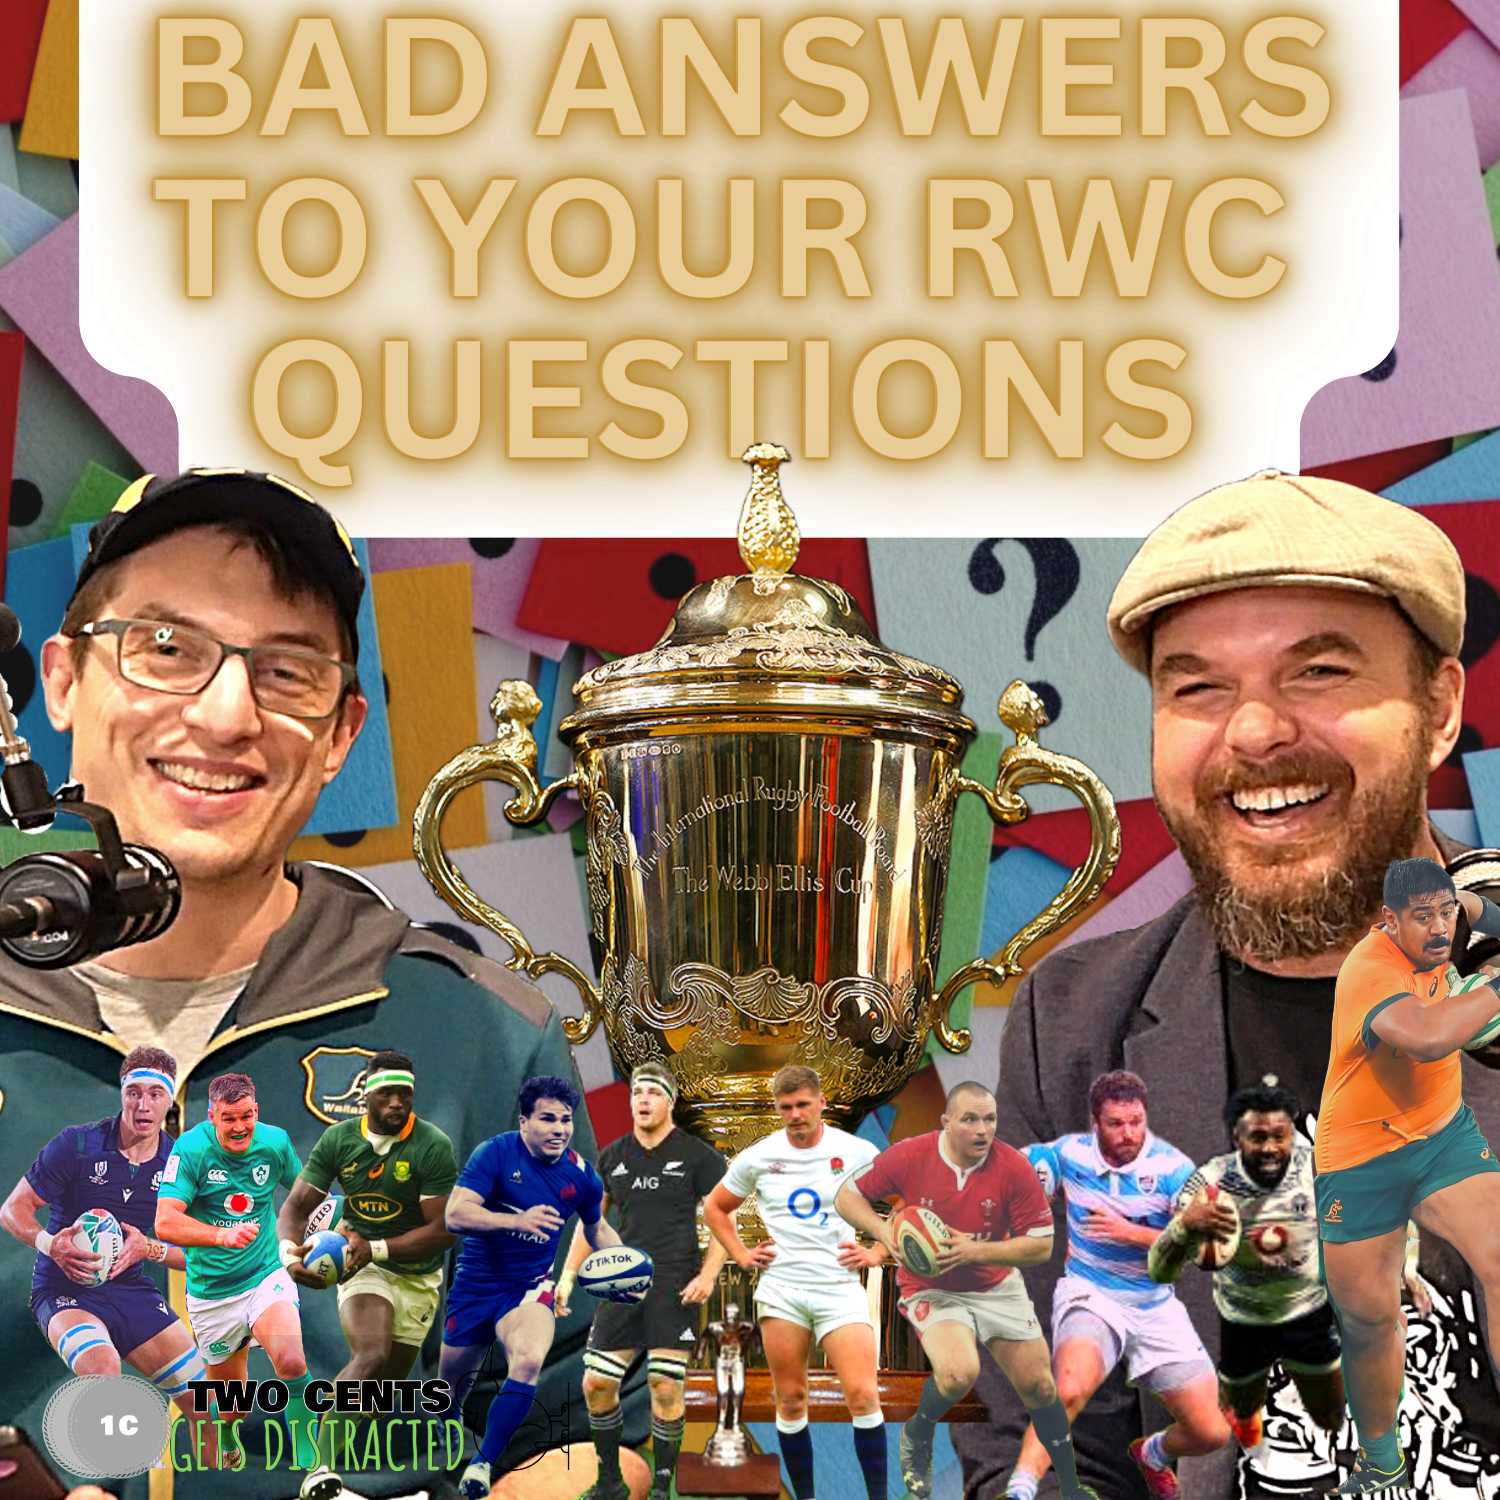 The Rugby World Cup is HERE & we answer your questions about it!